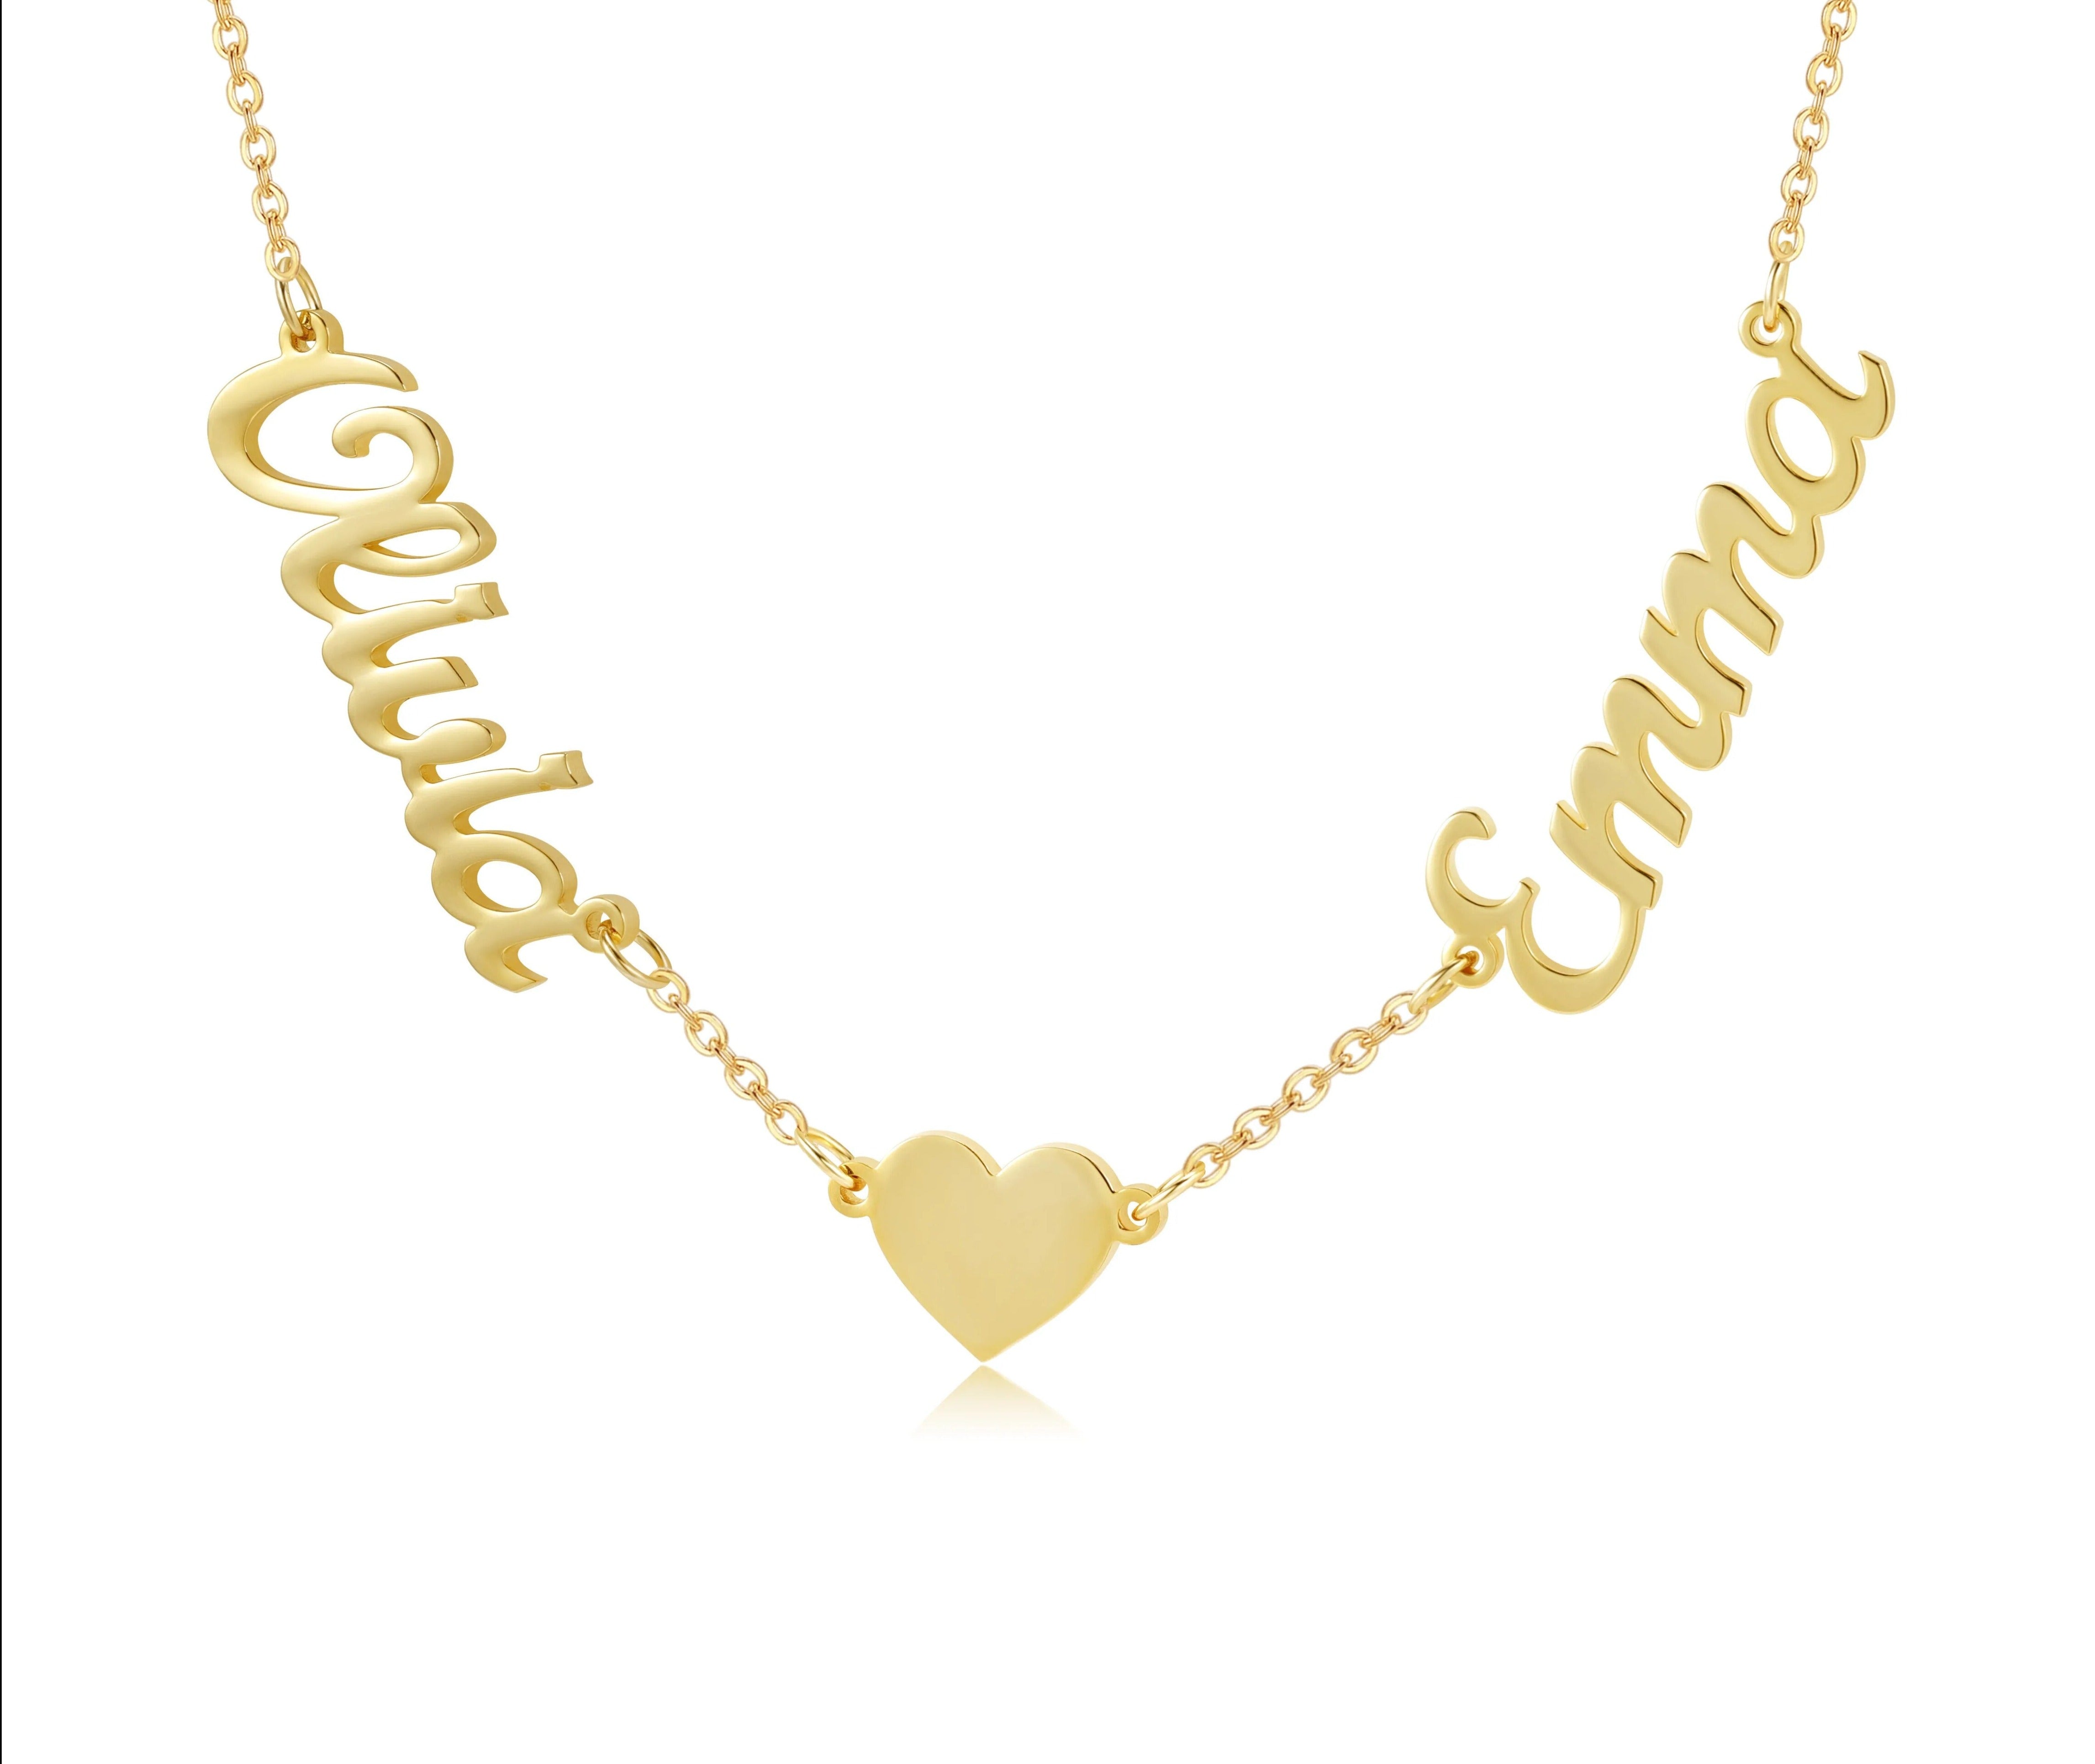 Personalized Heart Symbol Name Necklace